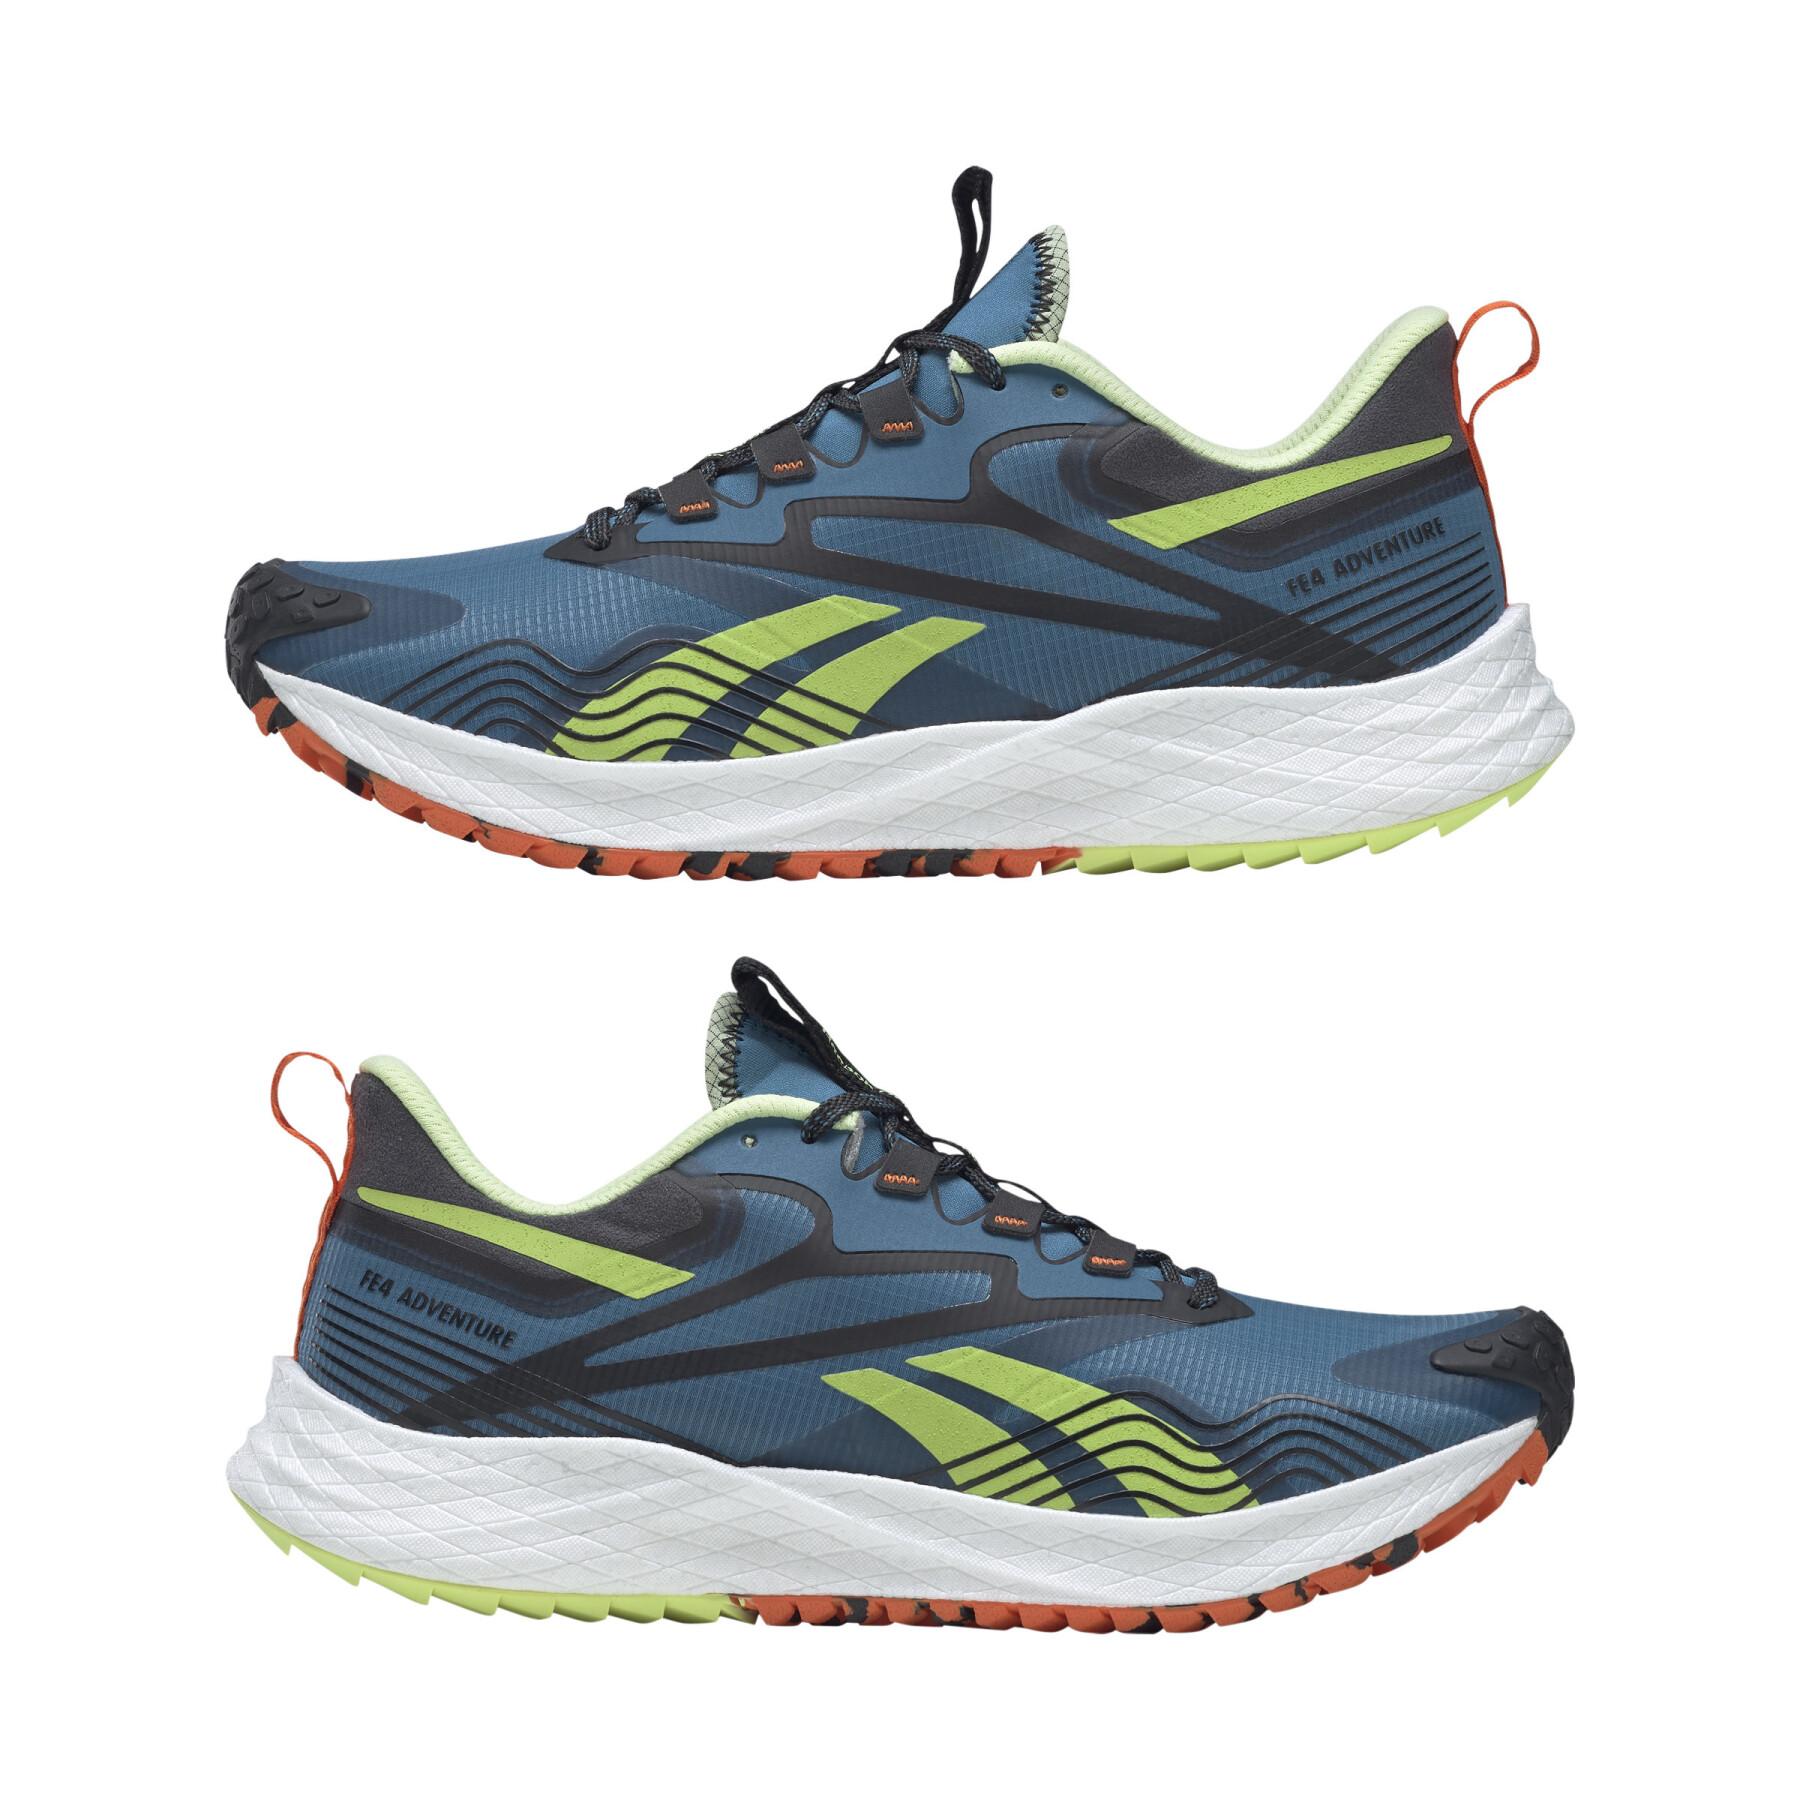 Shoes from running Reebok Floatride Energy 4 Adventure